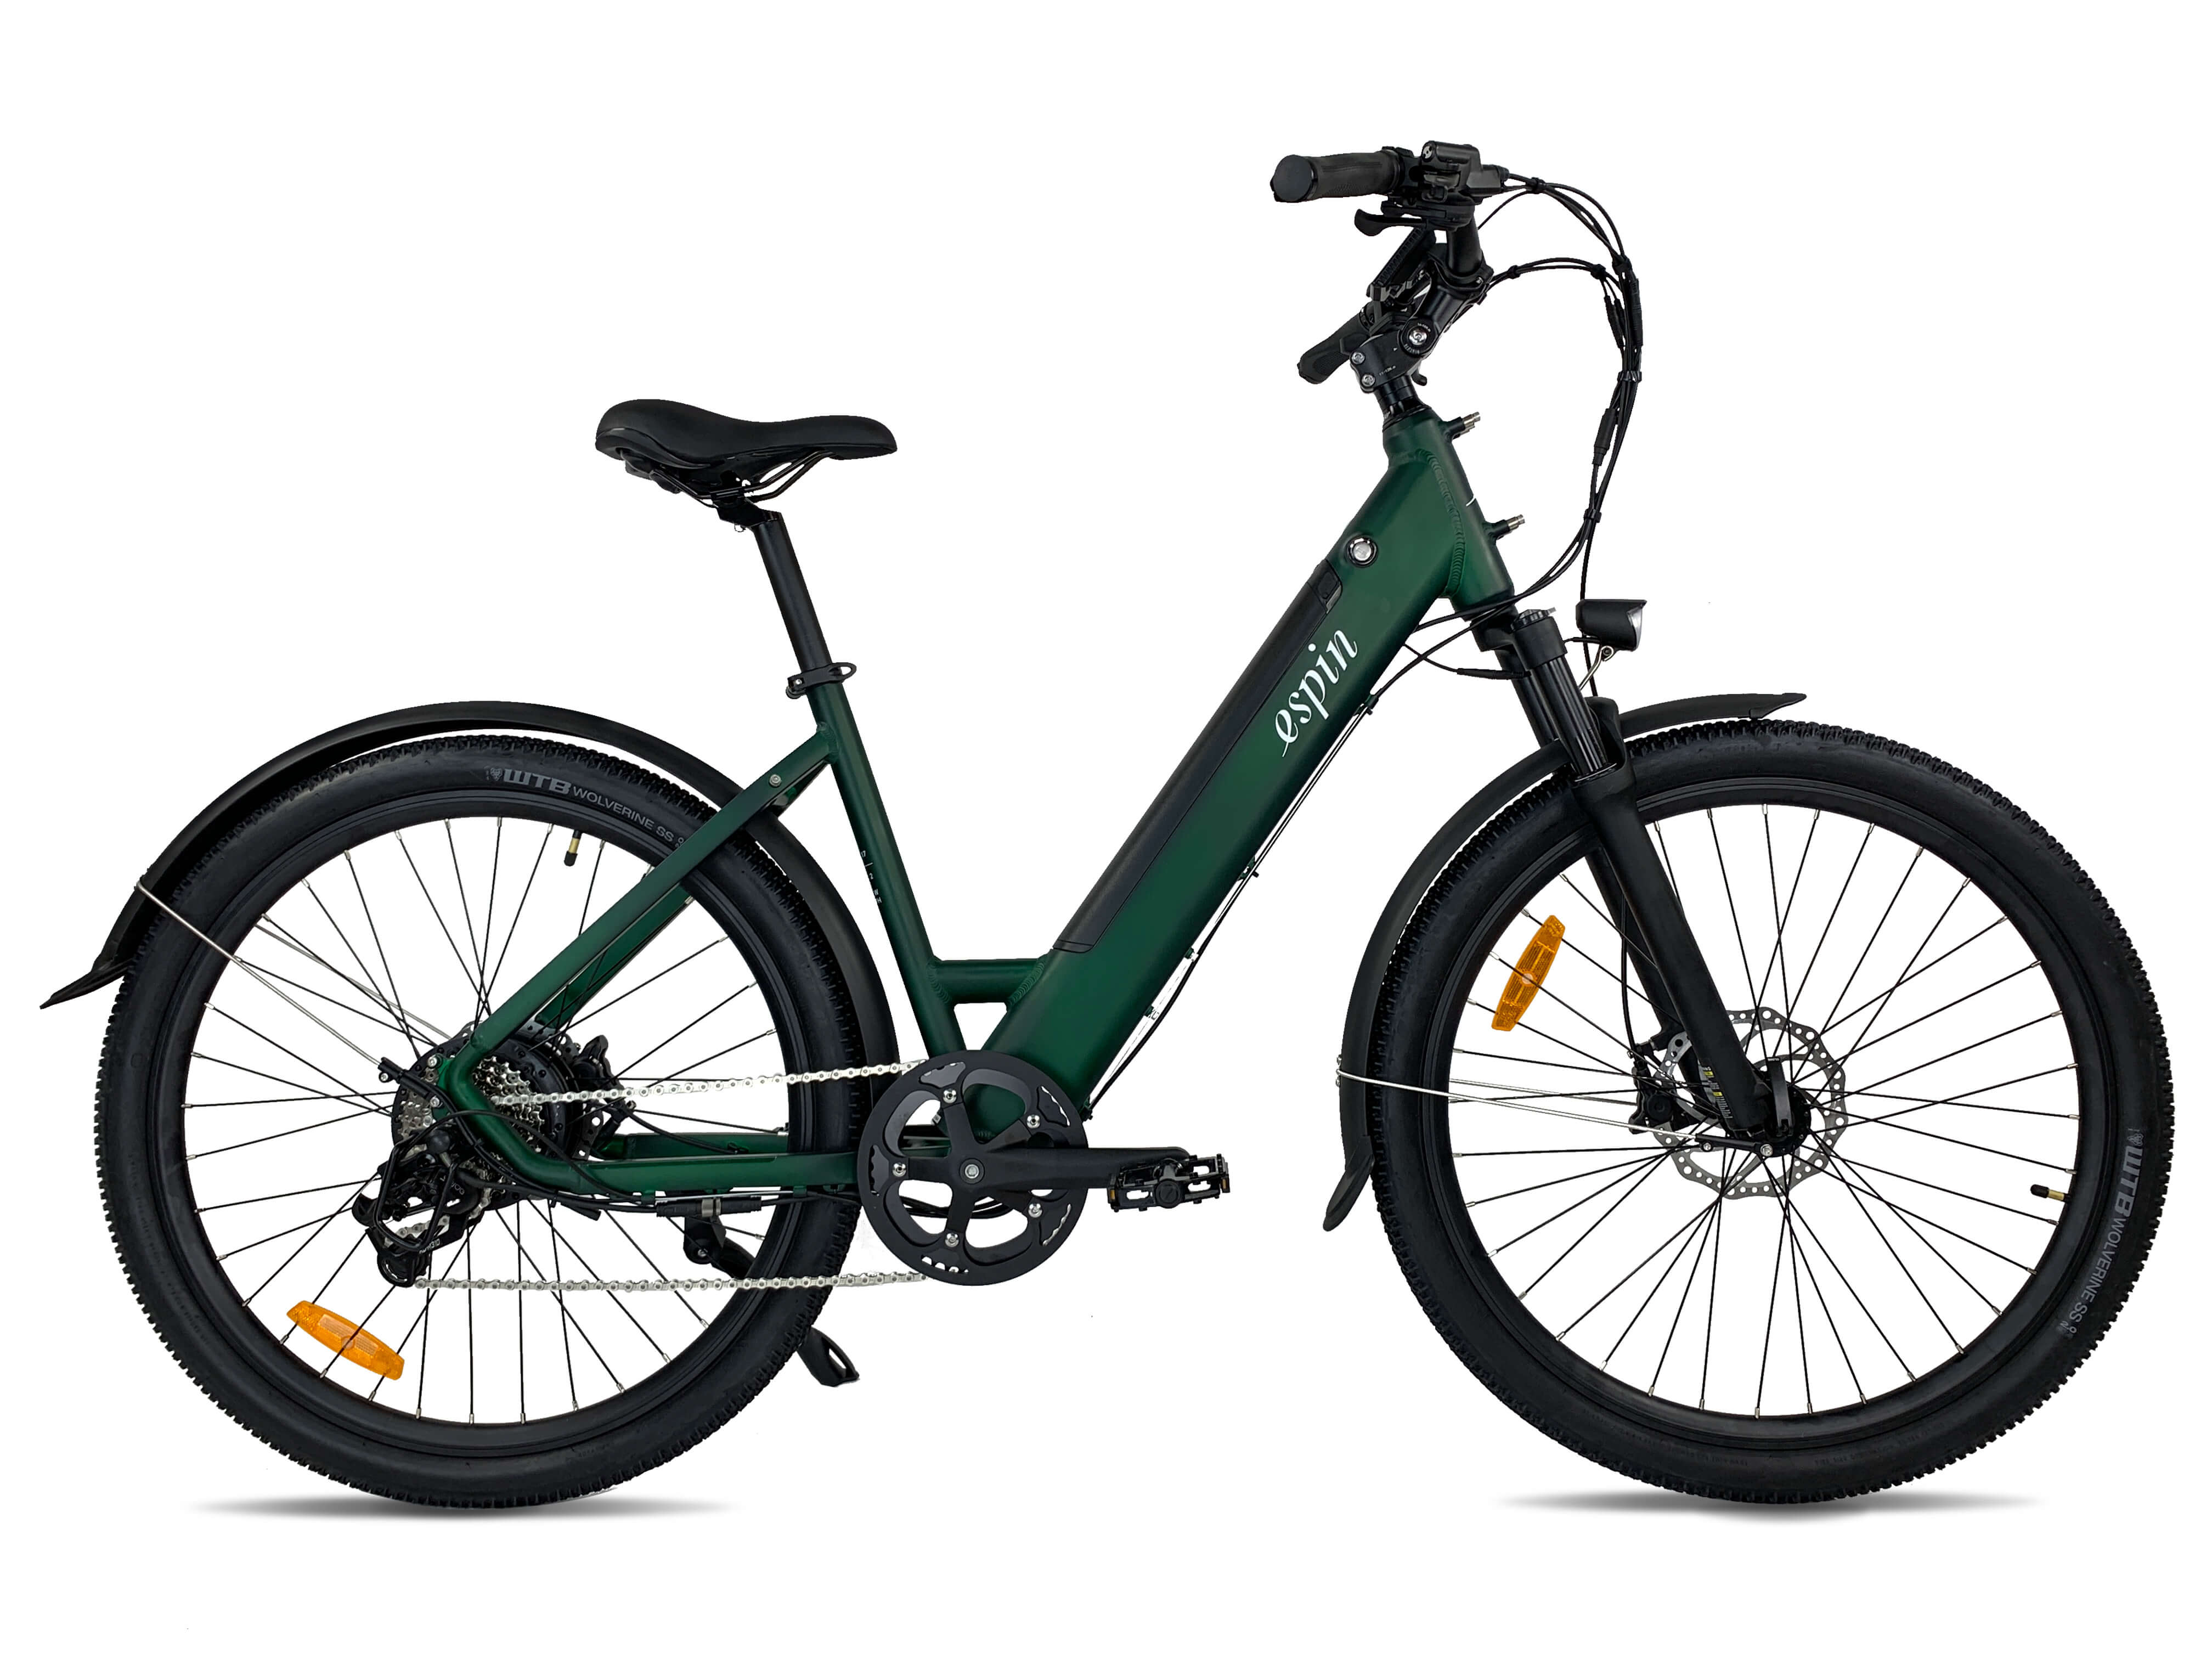 Espin Folding Fat Tire Electric Bike & City Bicycle & urban commuter bikes is capable and affordable